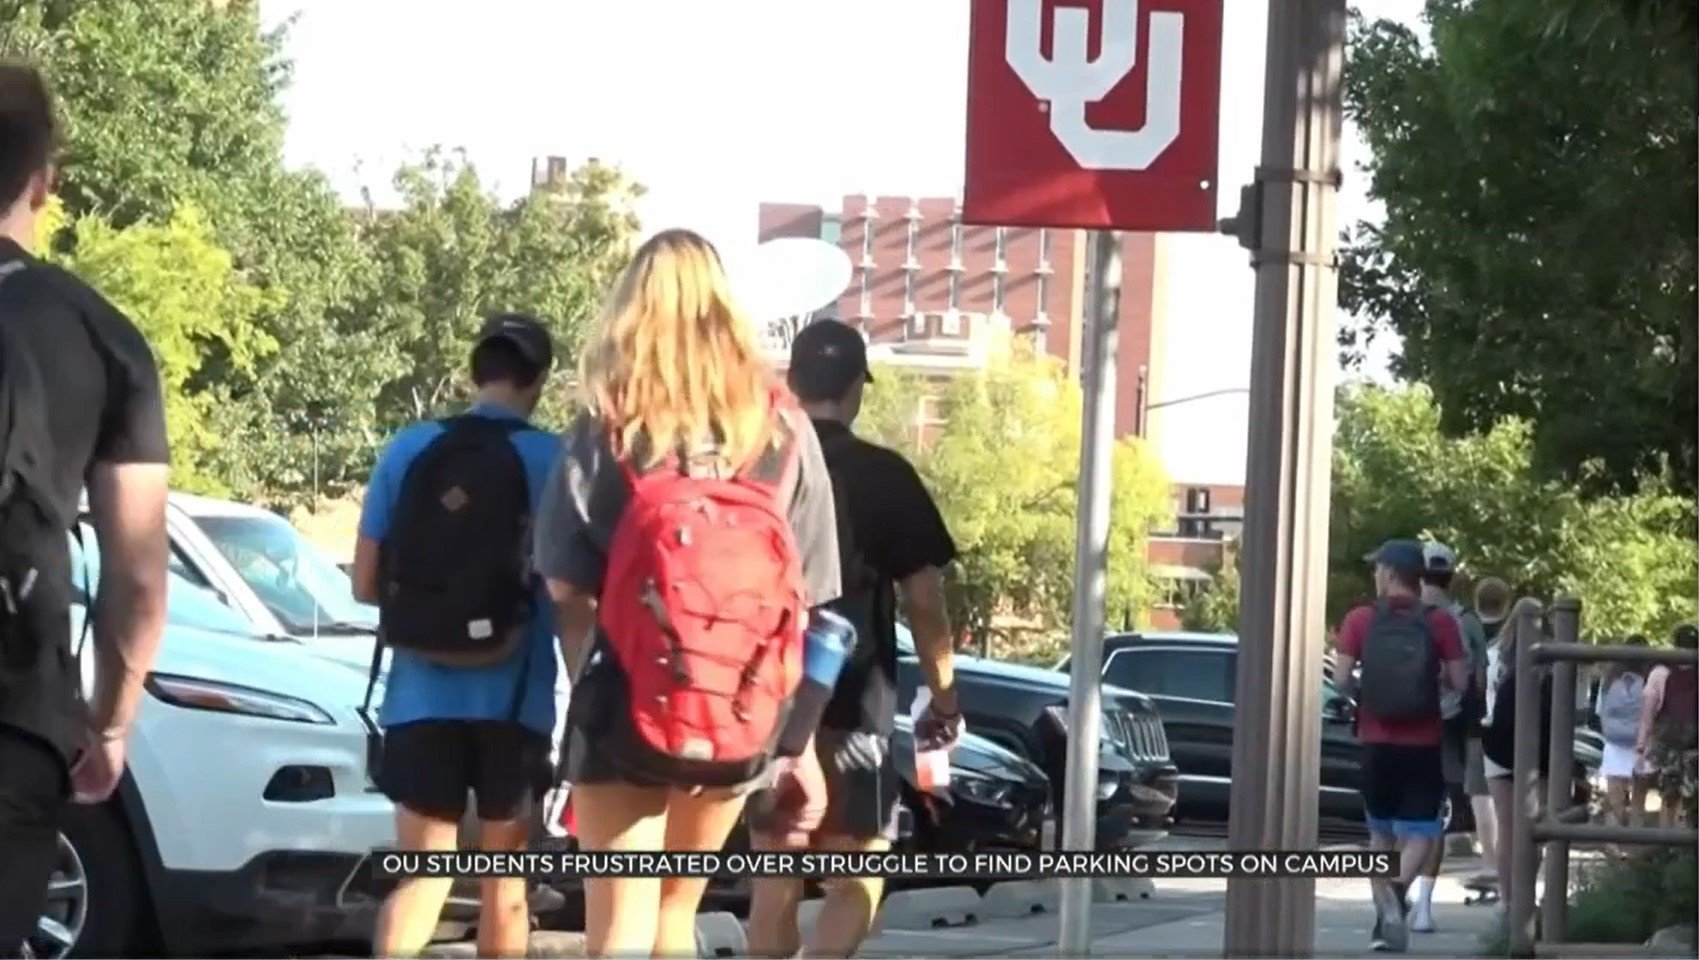 OU Students Disappointed In Availability Of Parking On Campus